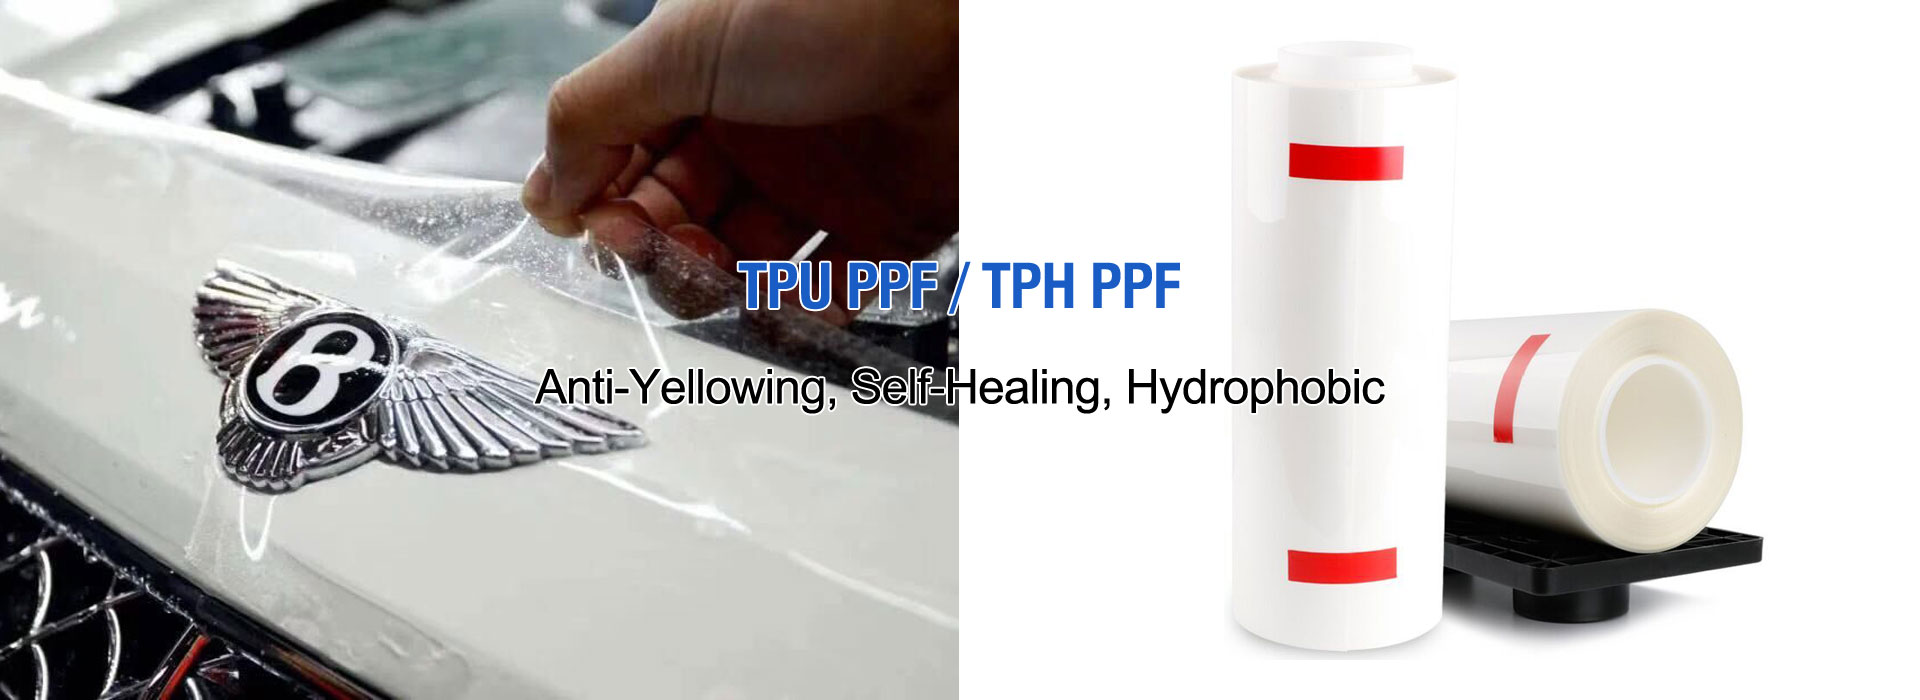 TPU PPE/TPH PPE Manufacturer